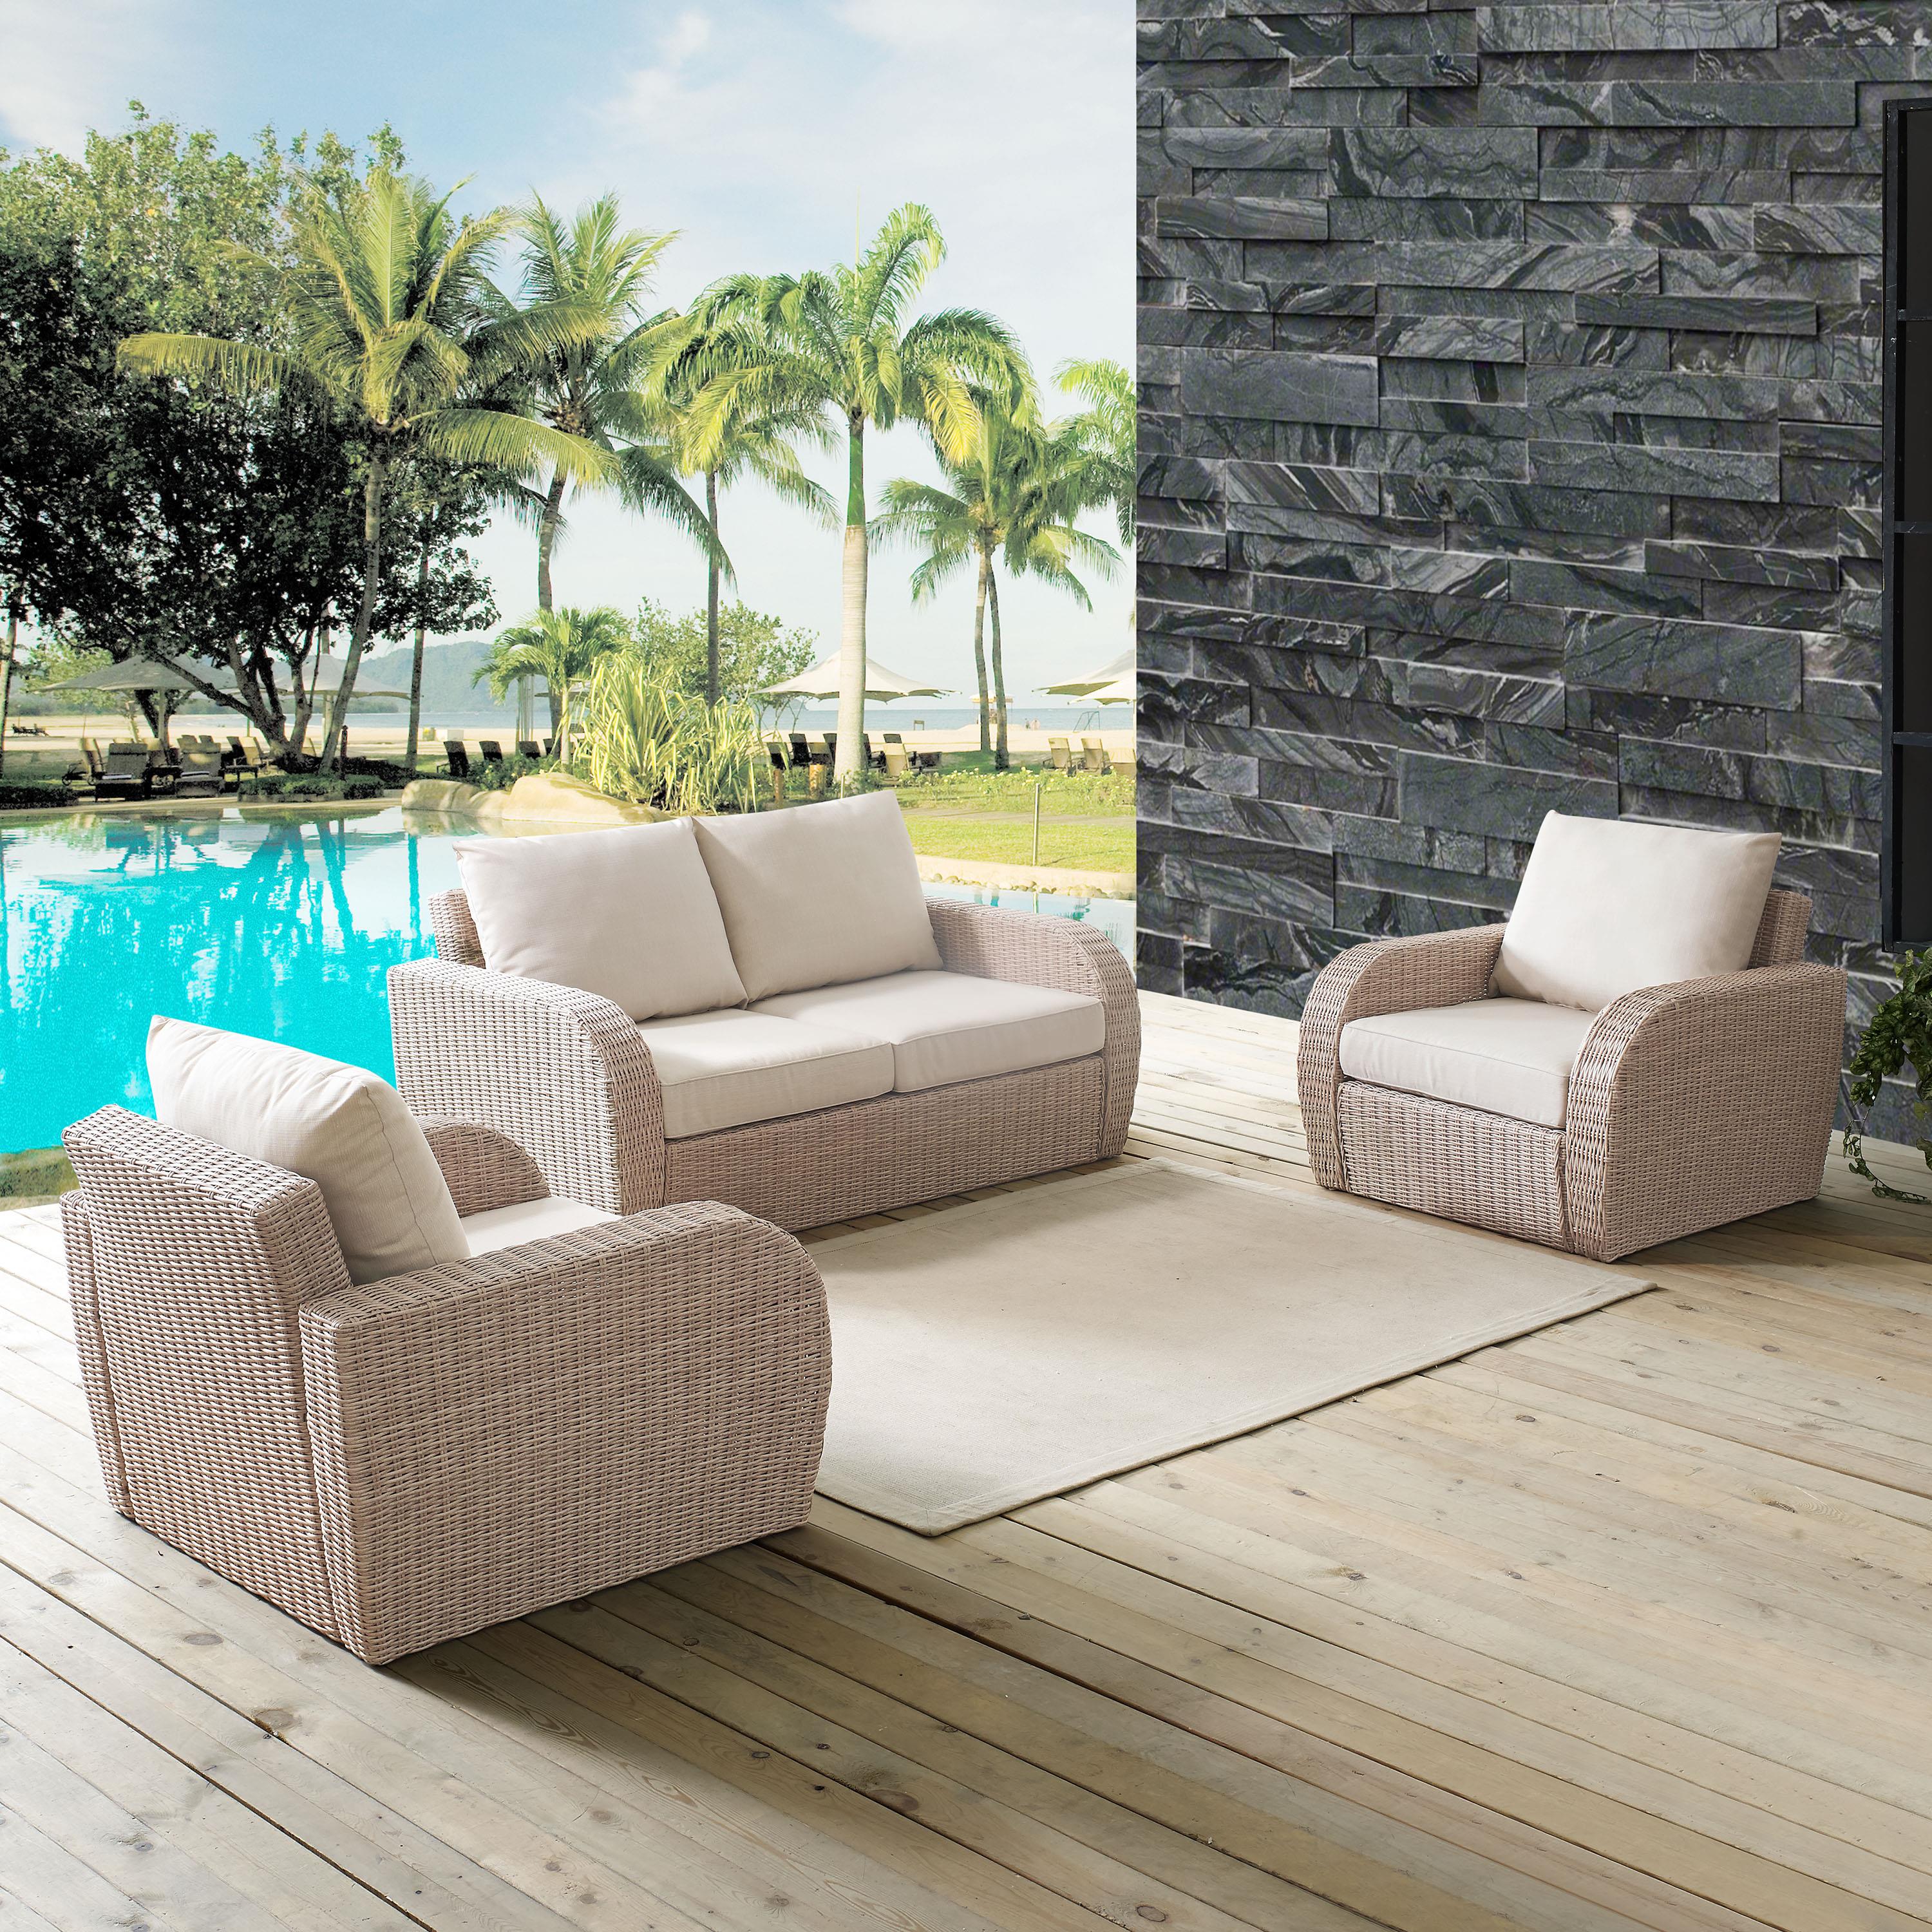 Crosley Furniture St Augustine 3 Pc Outdoor Wicker Seating Set With Oatmeal Cushion - Loveseat, Two Outdoor Chairs - image 4 of 5